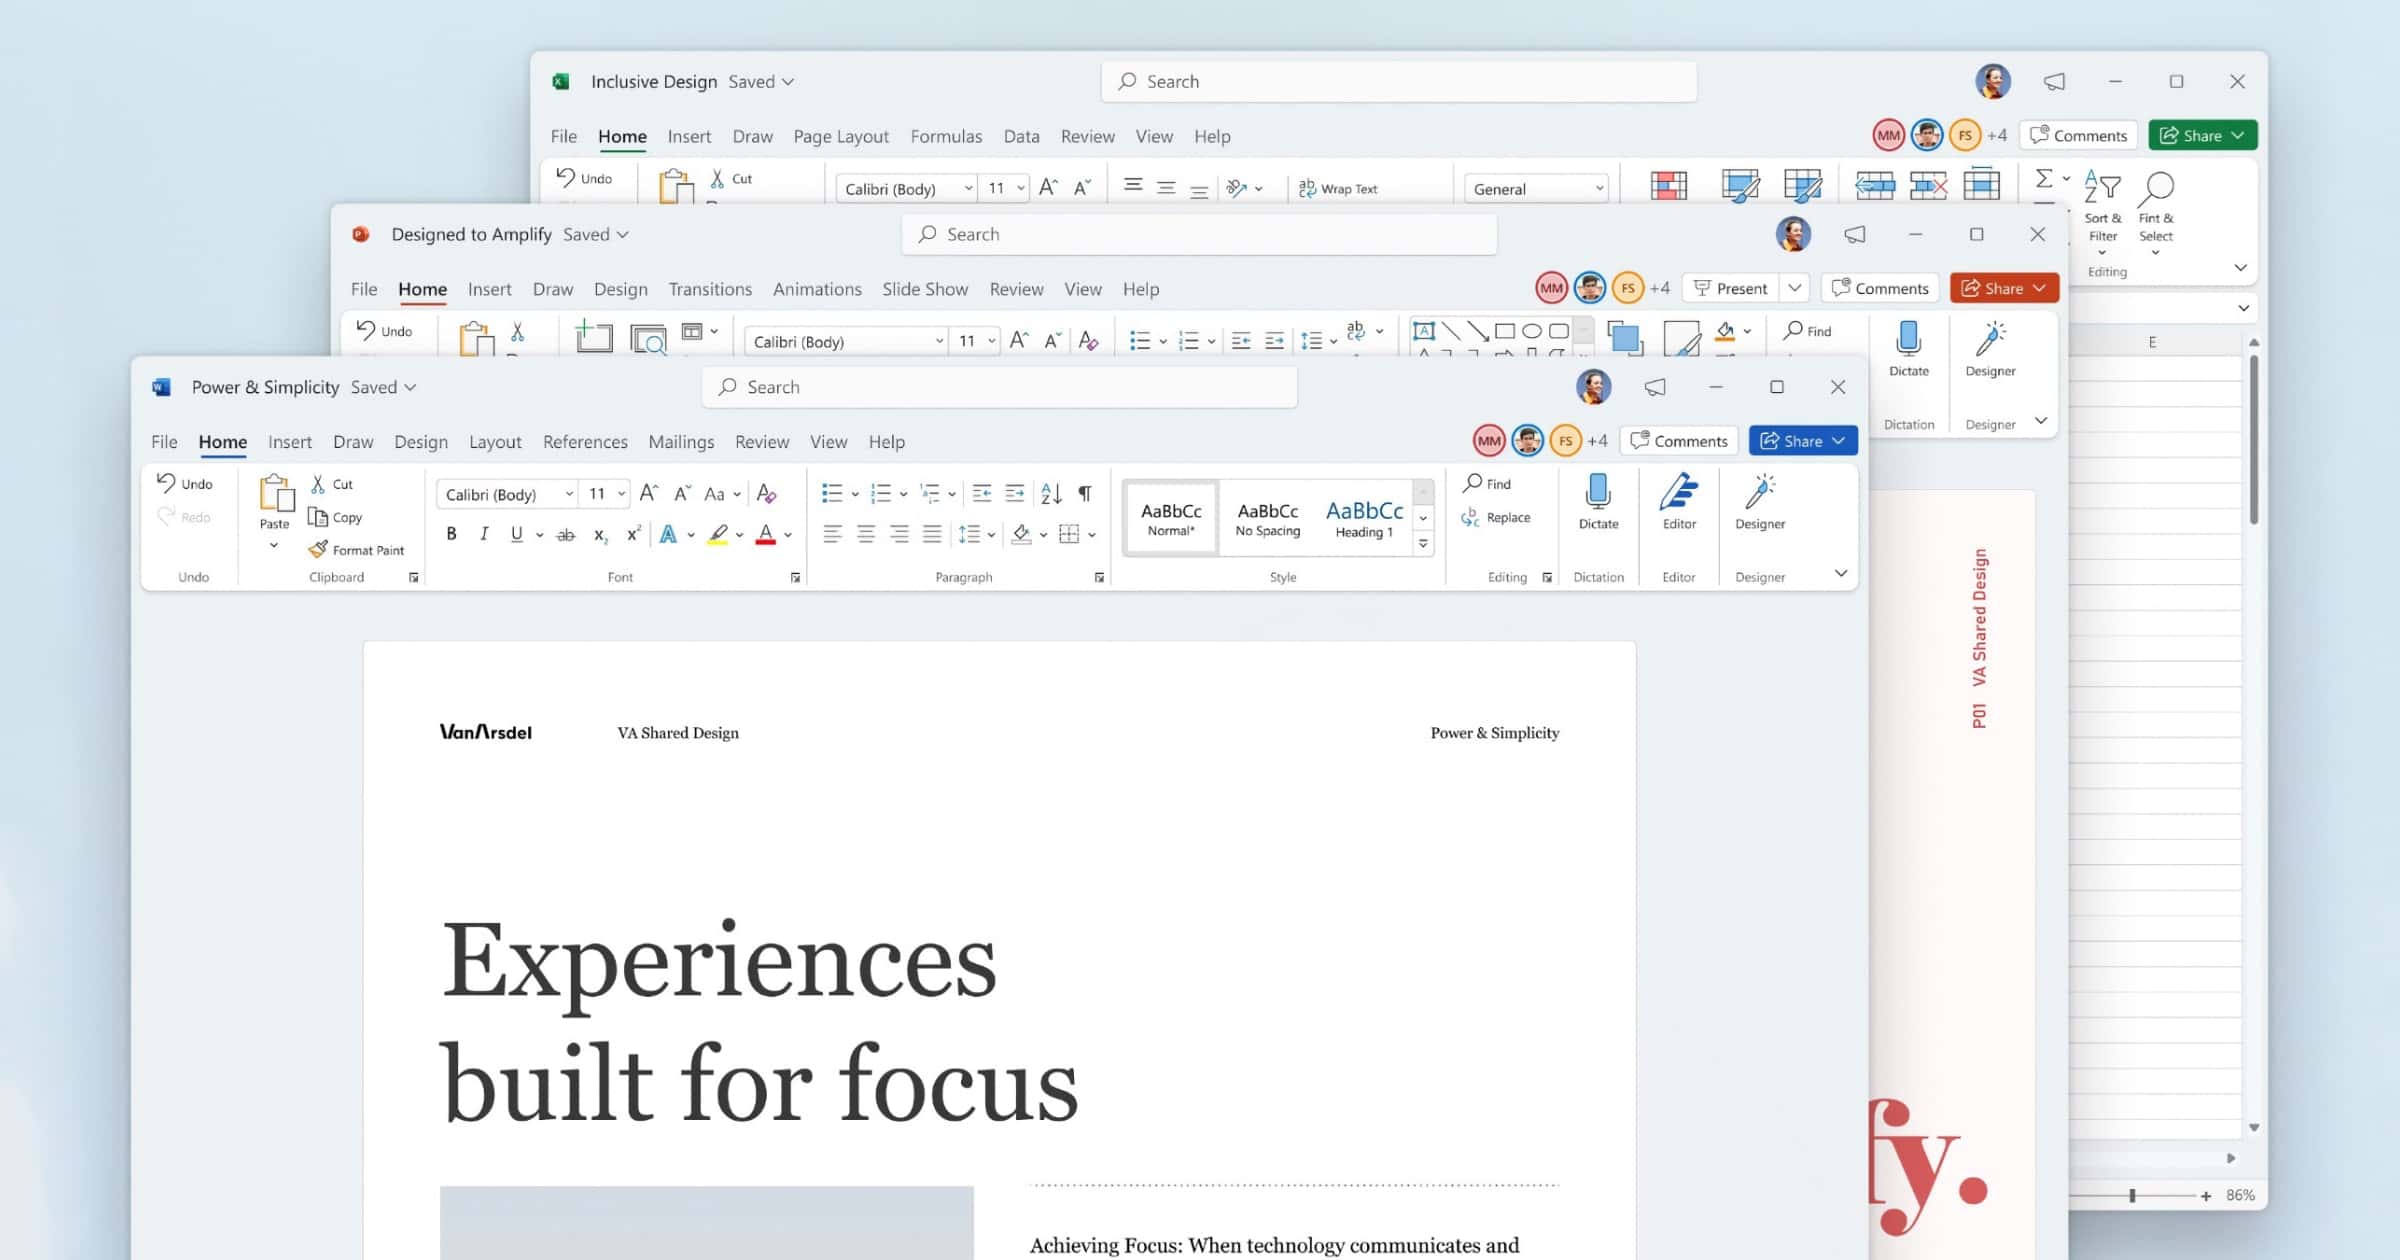 Microsoft to Release Office 2021 for Mac on October 5